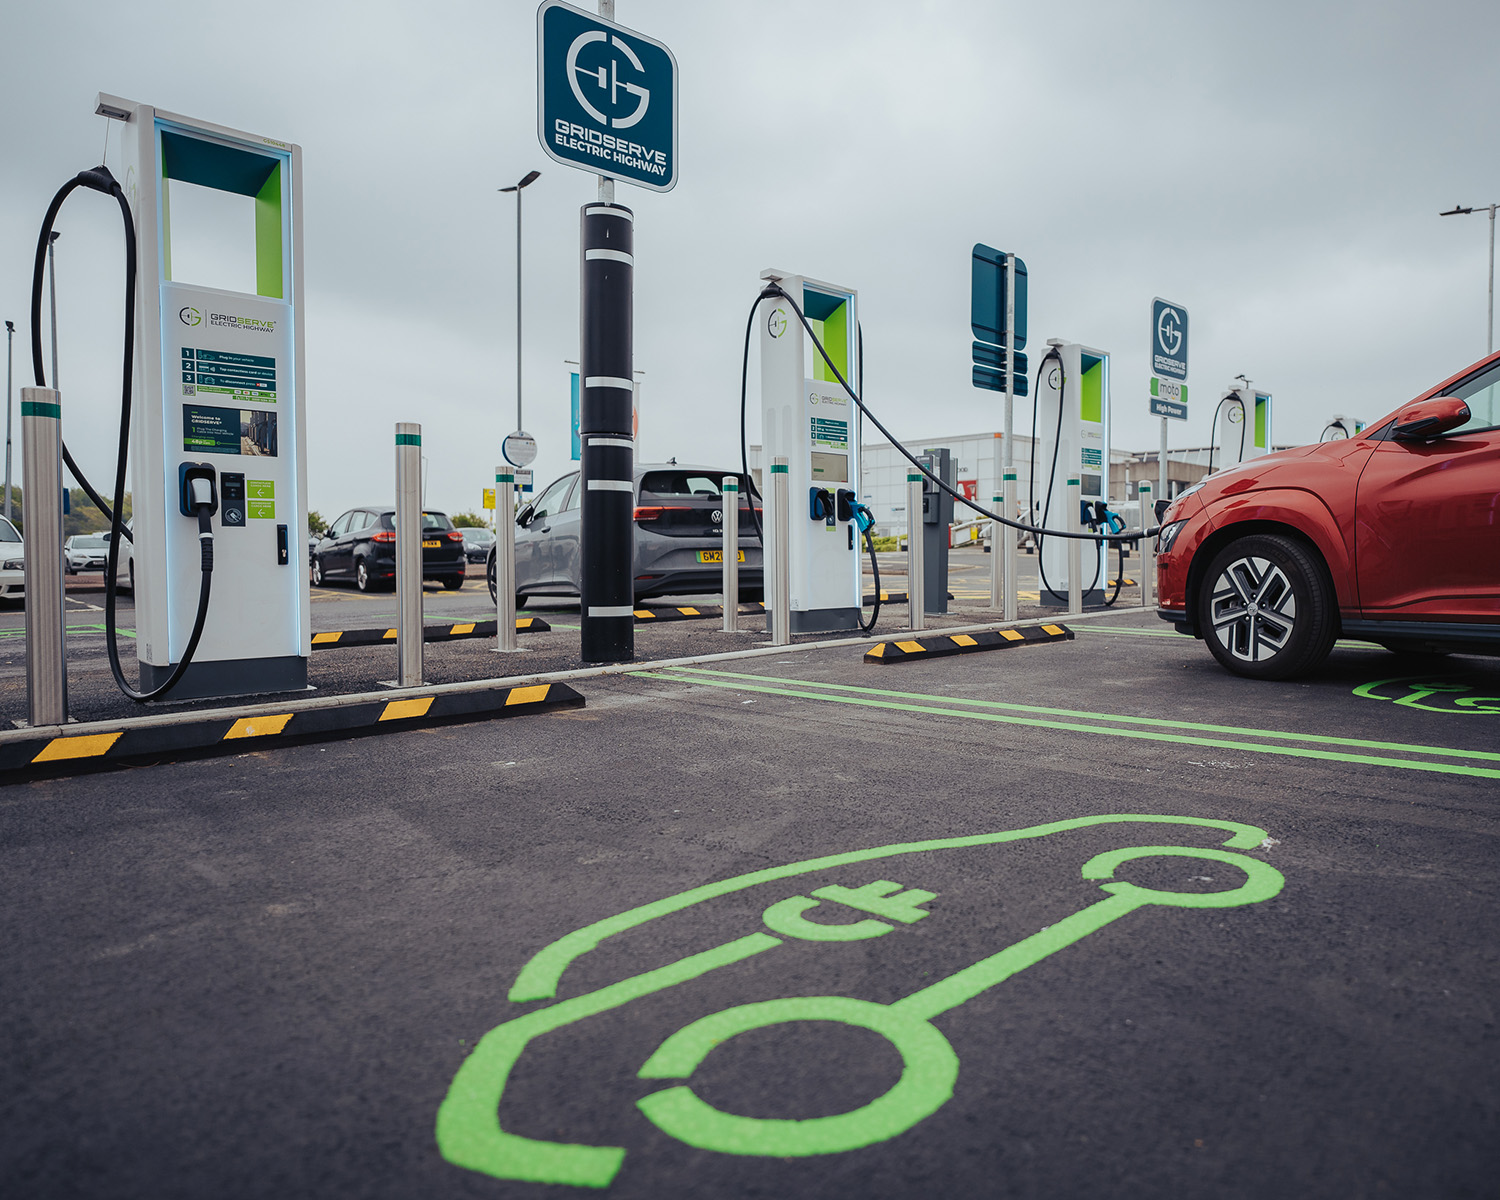 The number of fast-charging stations is increasing, such as the new GRIDSERVE High Power Electric Super Hub at Moto Thurrock, featuring 12 350kW-capable chargers